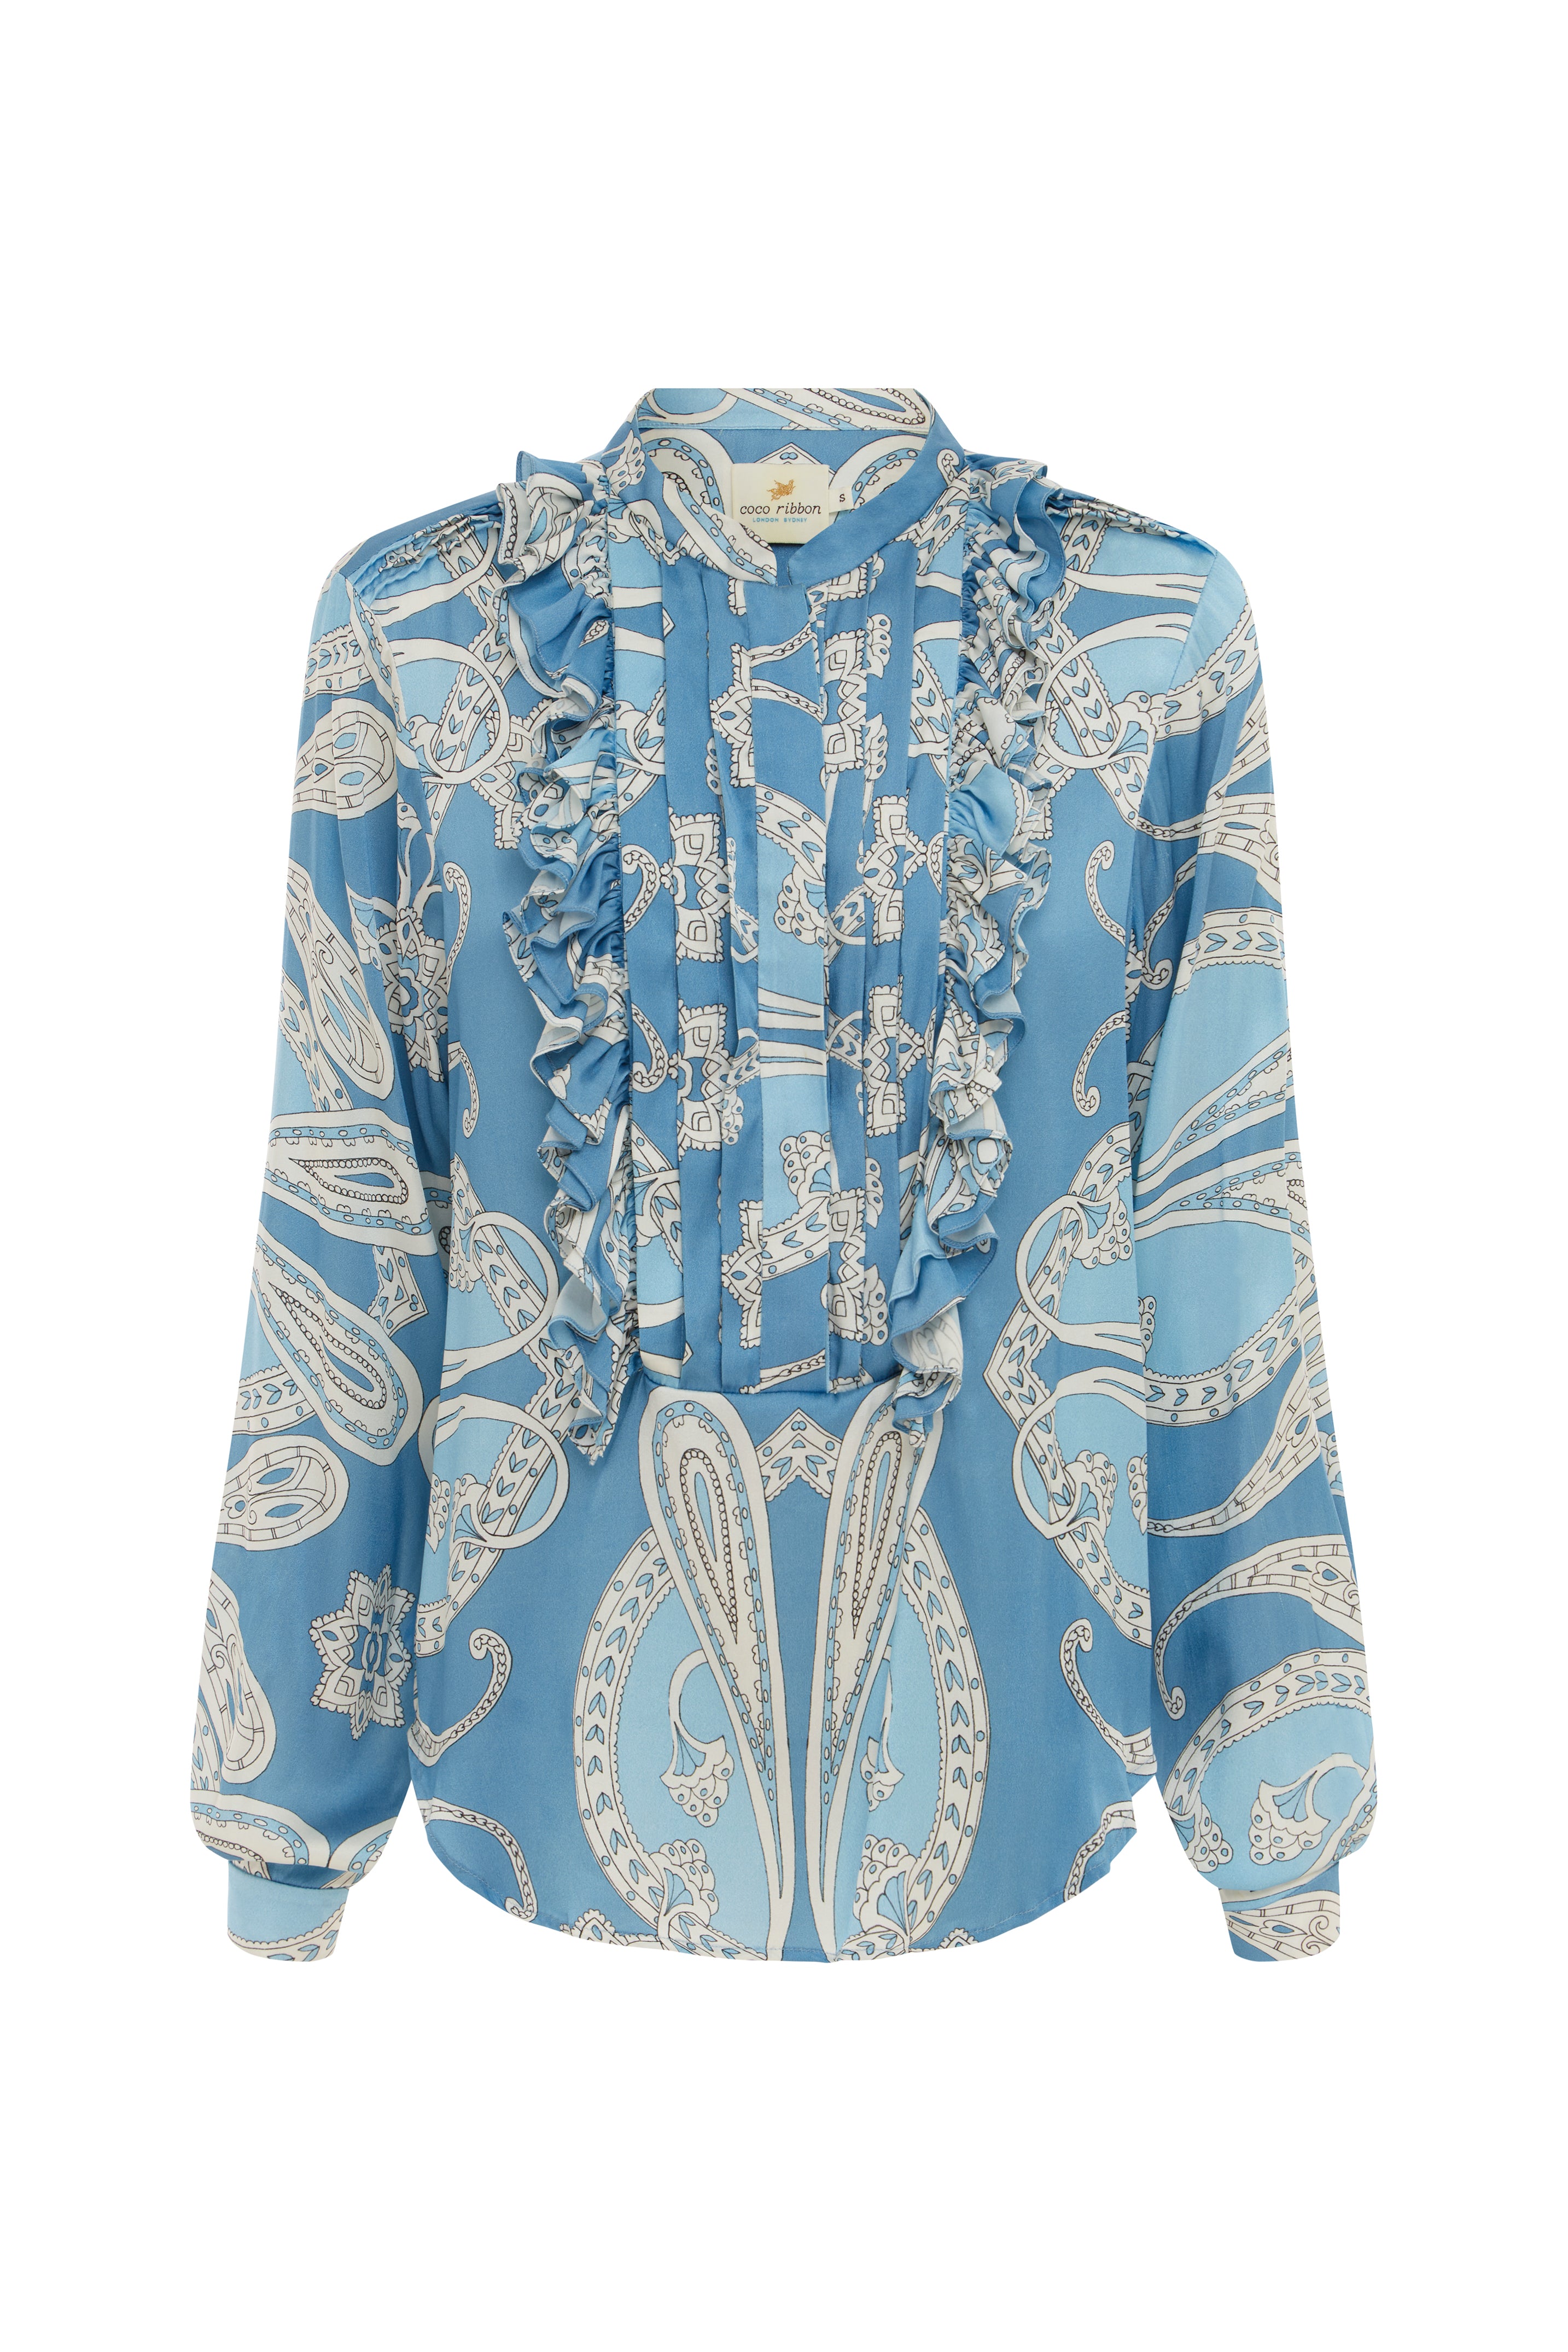 Bellagio Blouse in Blue Paisley